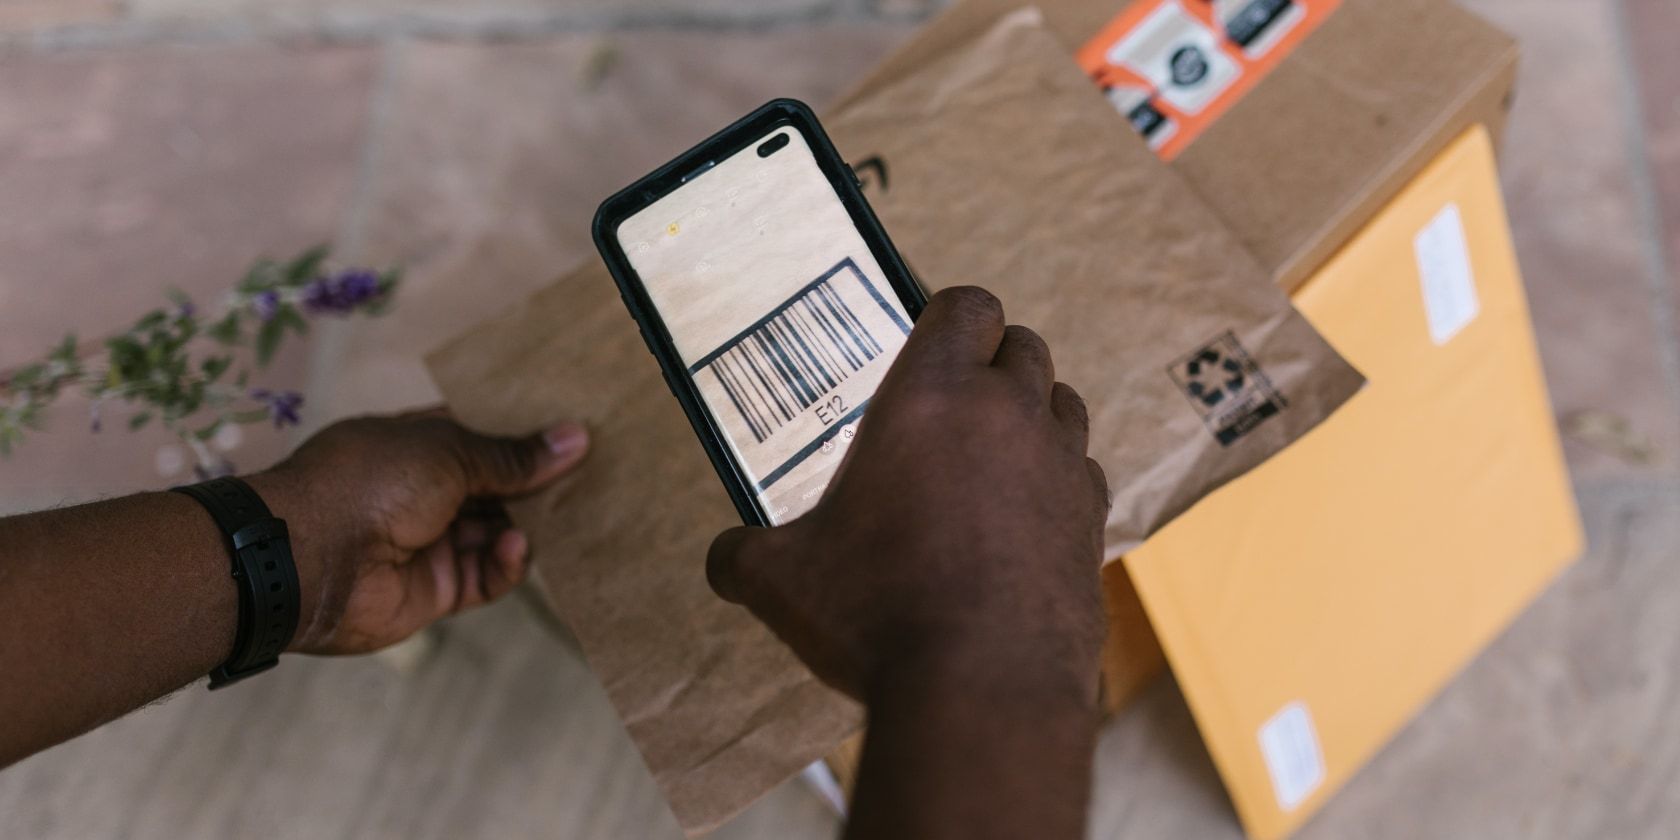 scanning a barcode with a phone